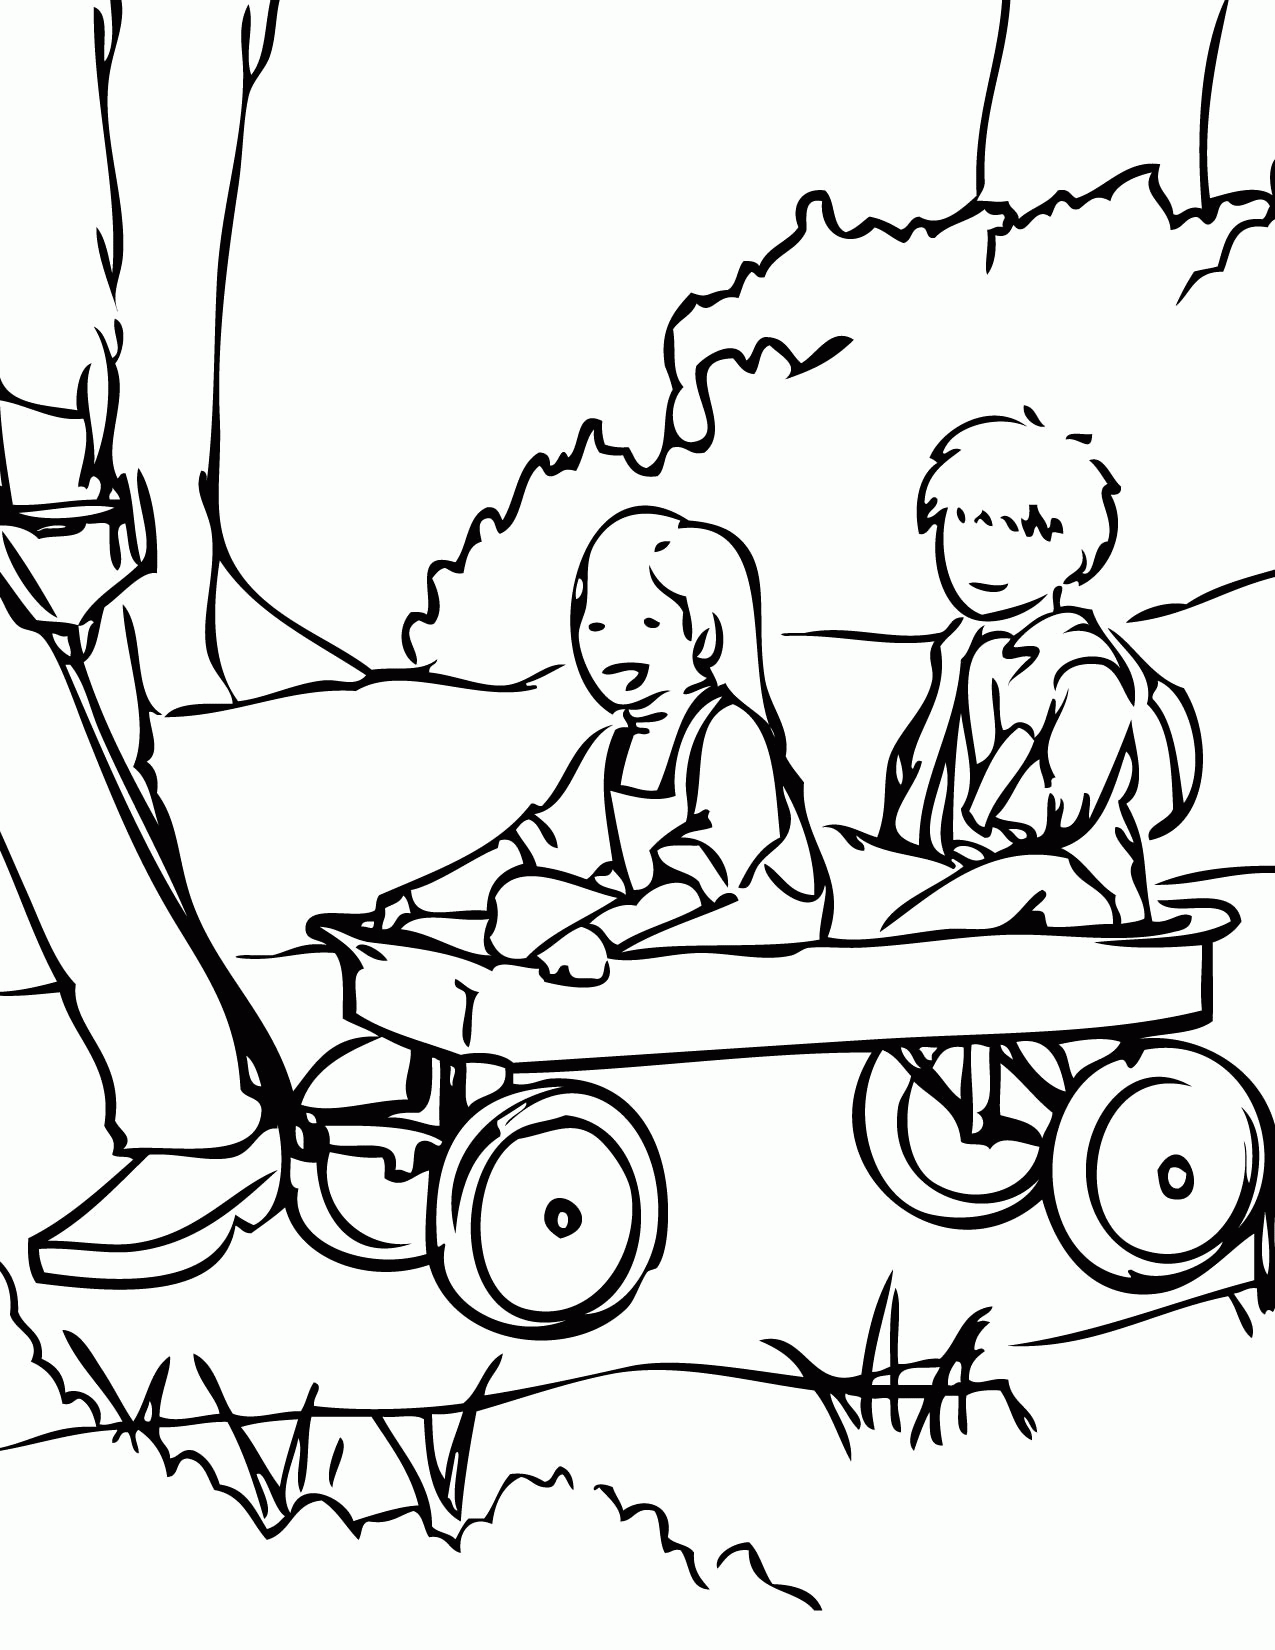 Wagon Coloring Page | Coloring Pages for Kids and for Adults